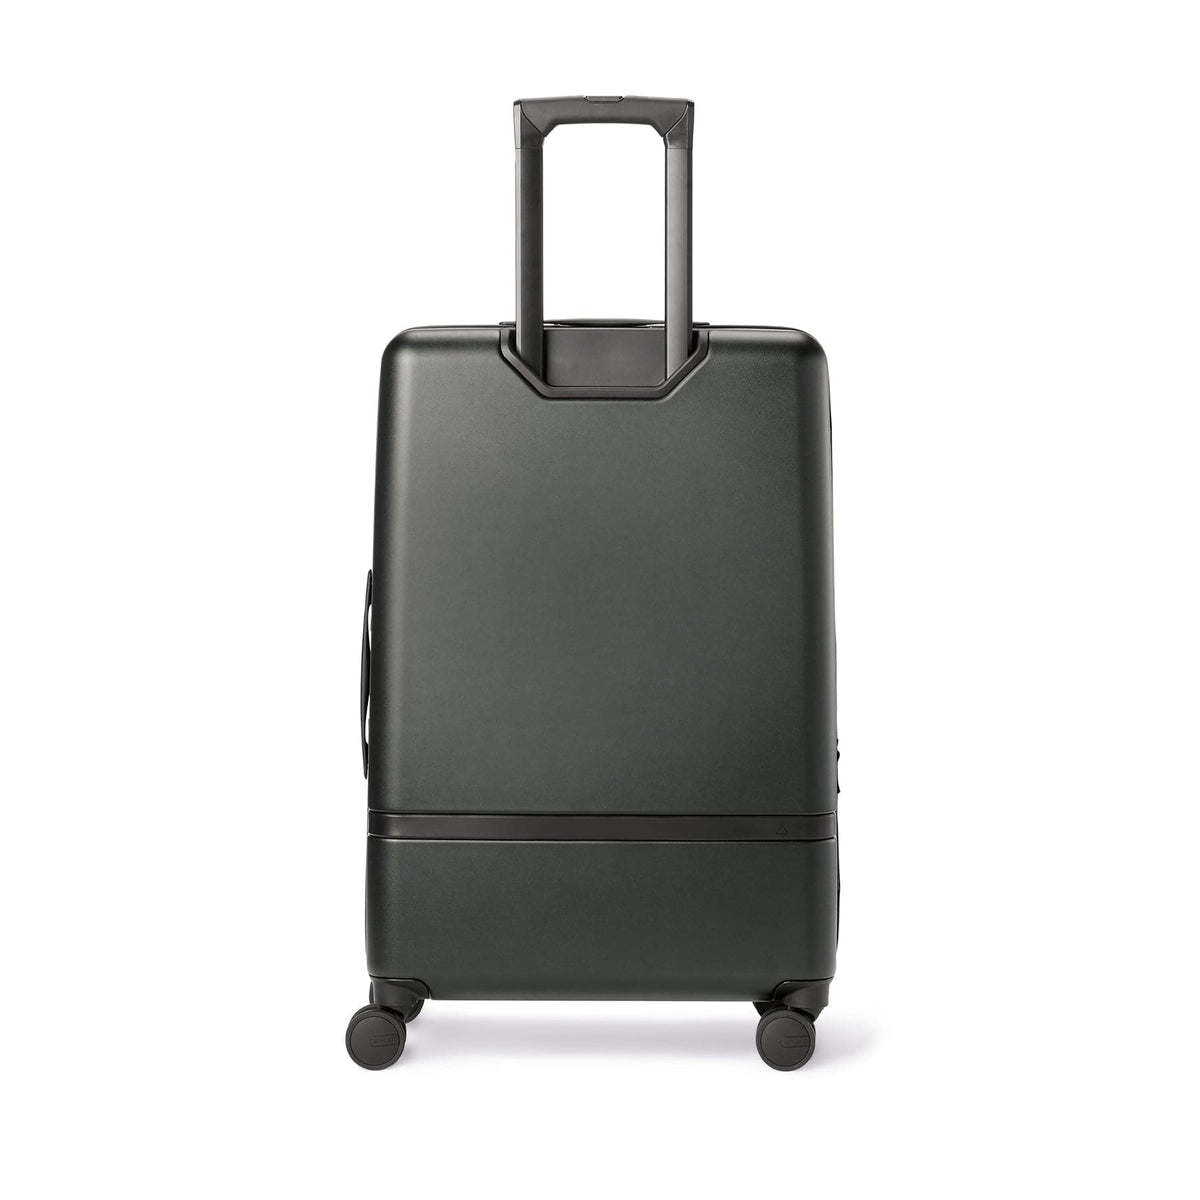 Nomatic Check-In Carry On Luggage